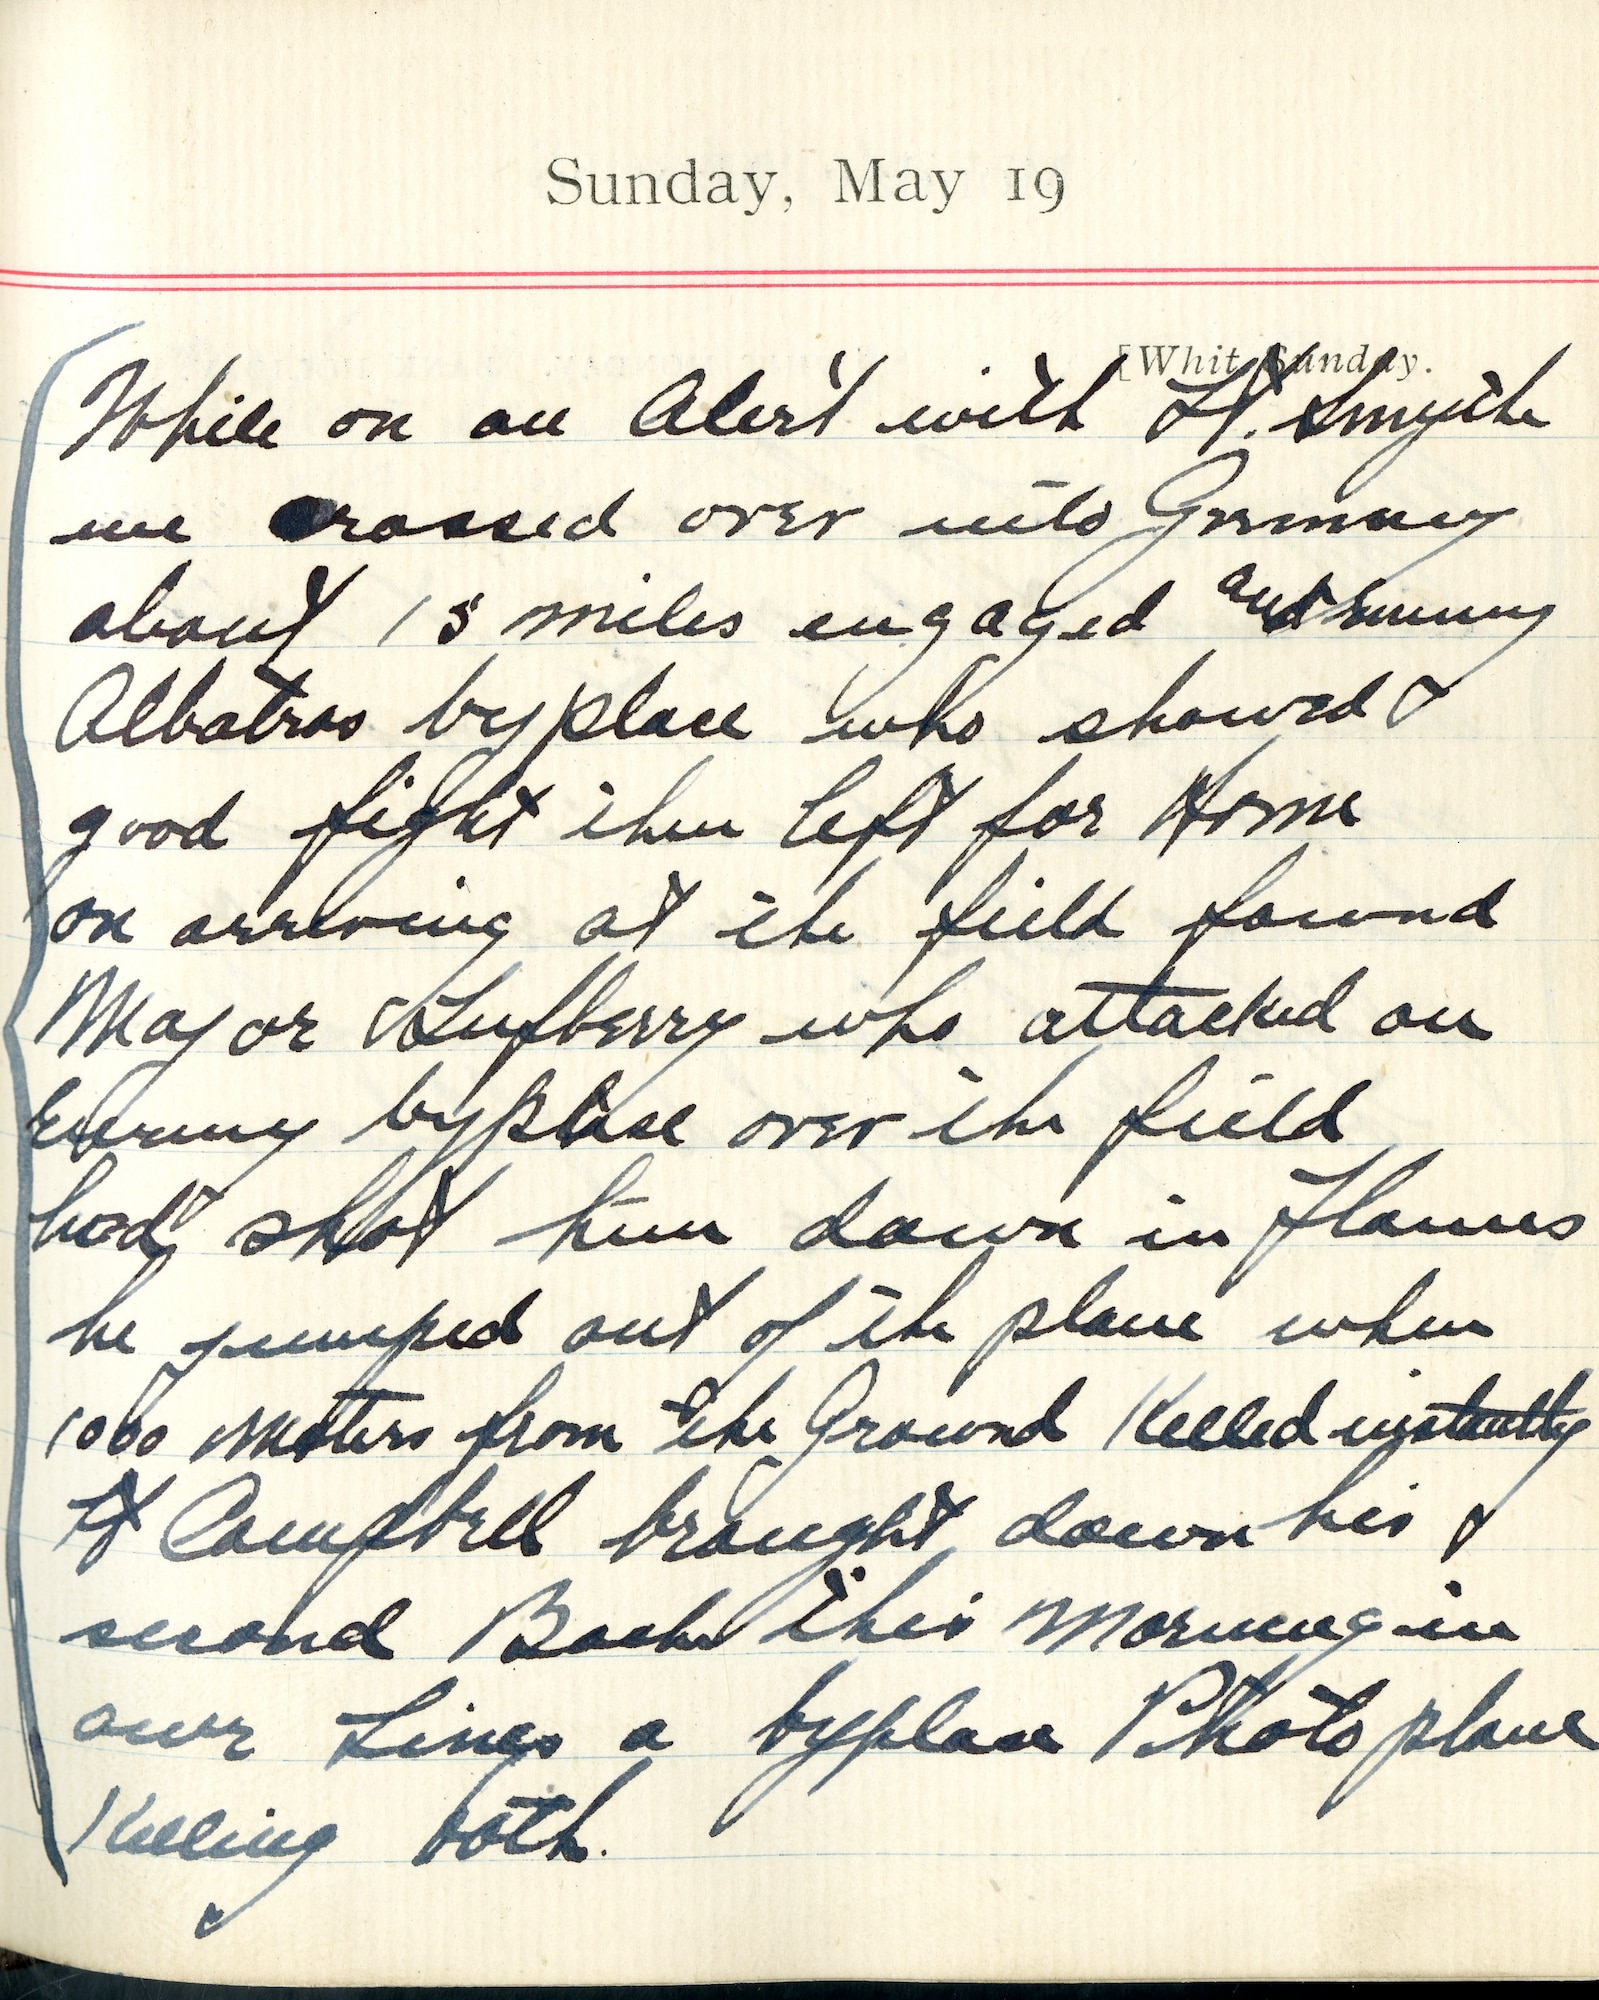 Capt. Edward V. Rickenbacker's 1918 wartime diary entry. (05/19/1918).

While on an alert with Lt. [Walter W.] Smyth, we crossed over into Germany about 15 miles.  Engaged an enemy Albatros byplace who showed good fight then left for home.  On arriving at the field, found Major Lufbery, who attacked an enemy byplace over the field [and] had shot him [Lufbery] down in flames.  He jumped out of the plane when 1000 meters from the ground.  Killed instantly.  Lt. Campbell brought down his second Boche this morning in our lines, a byplace photo plane, killing both.